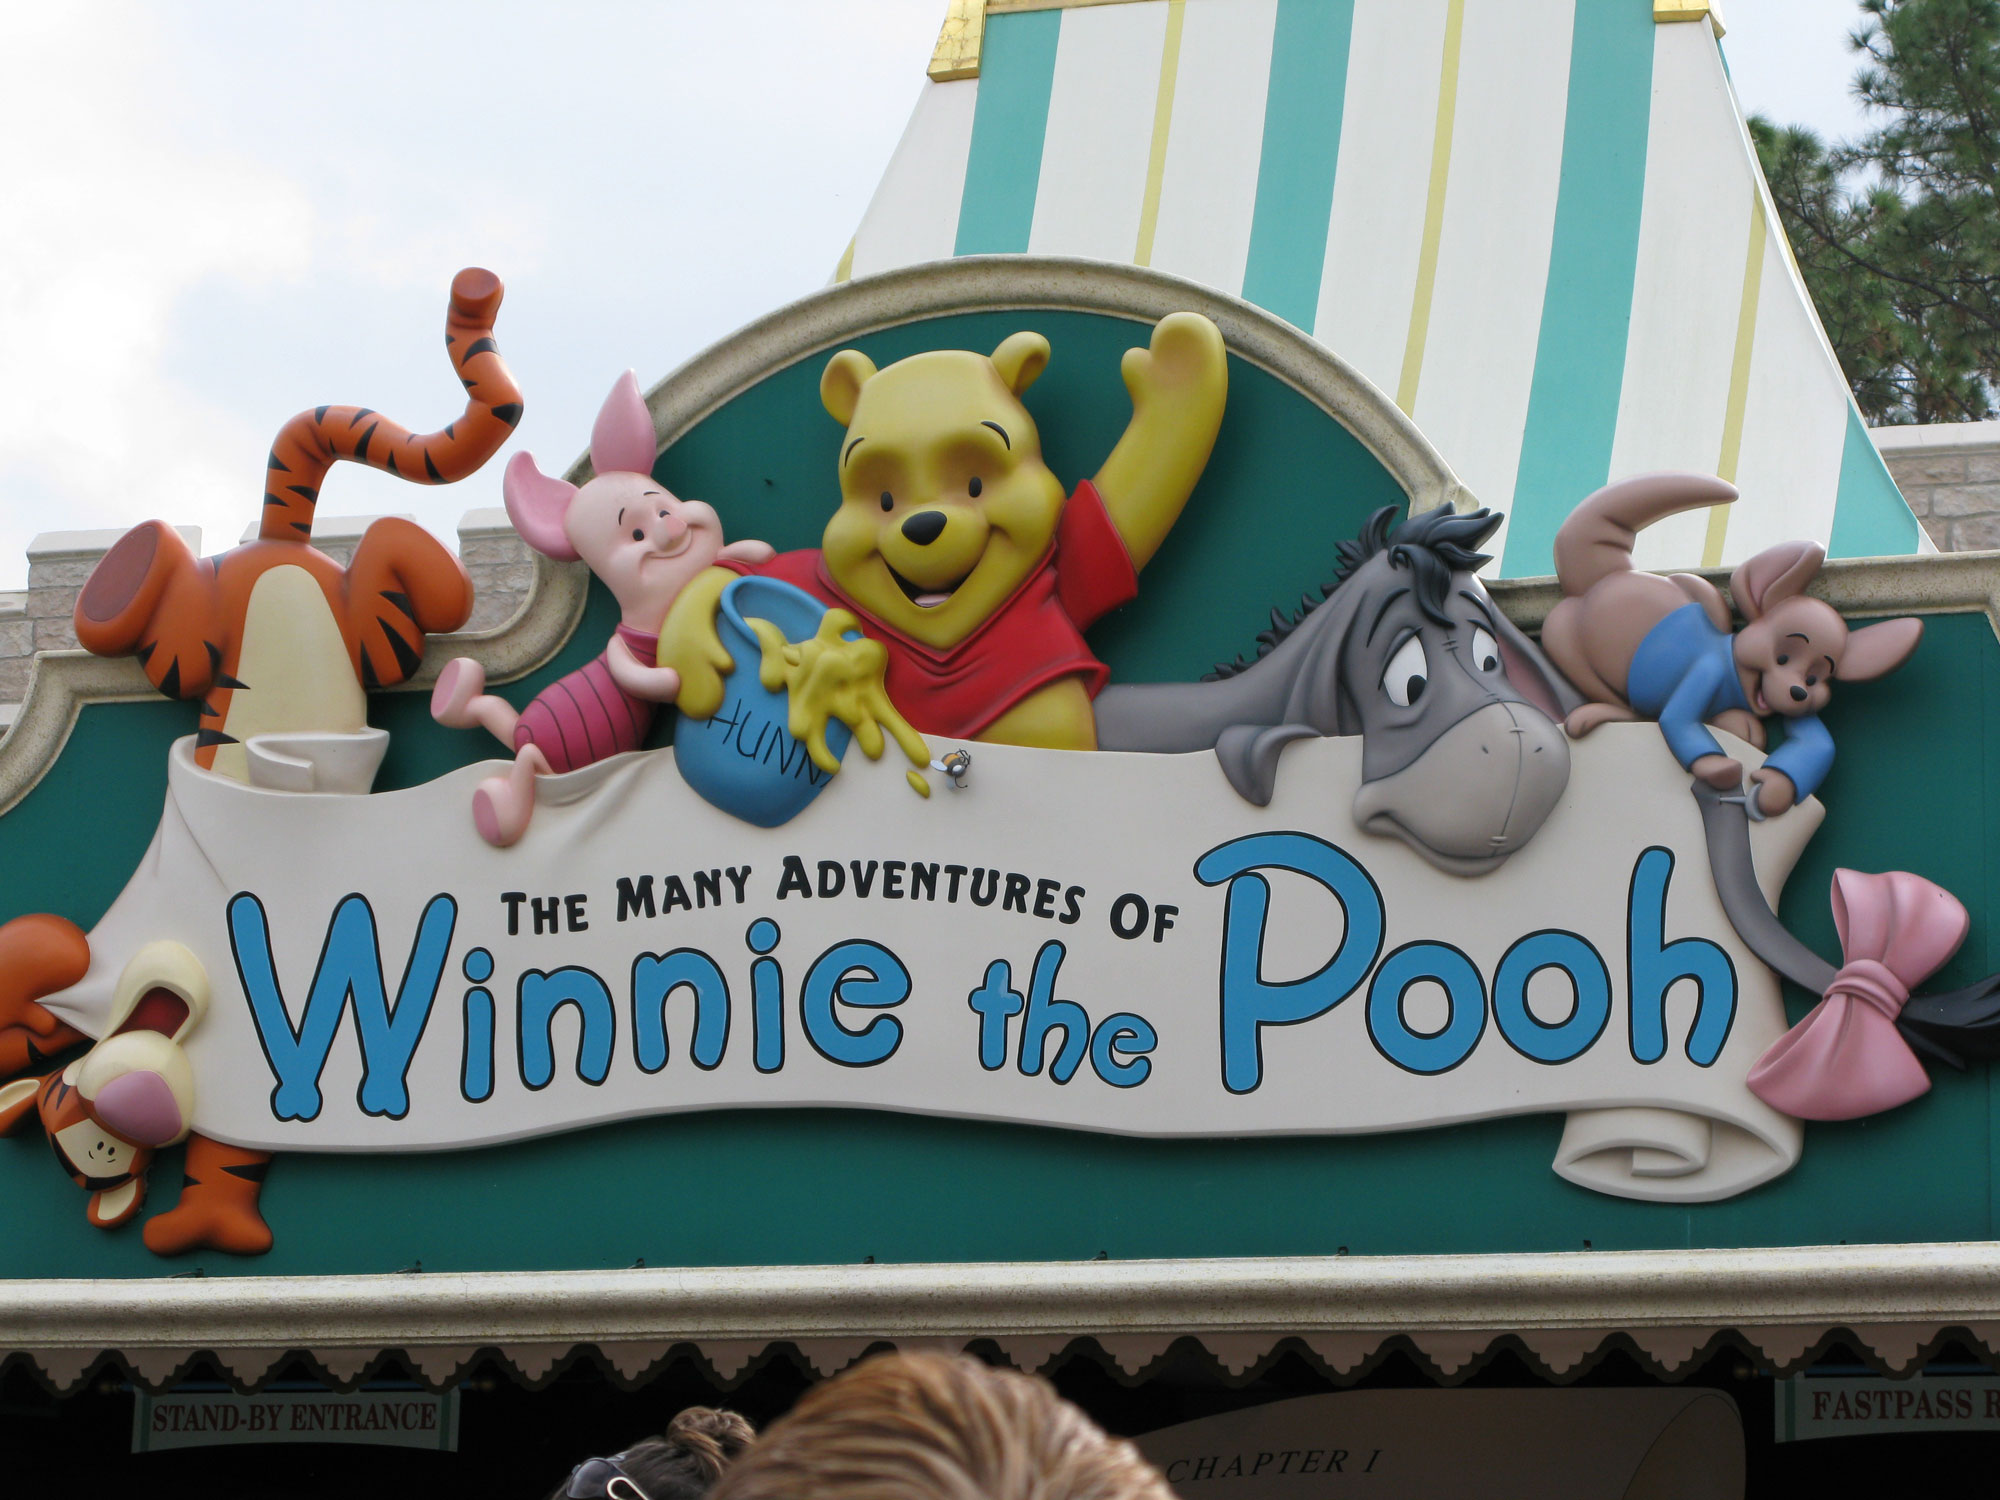 Many Adventures of Winnie the Pooh sign